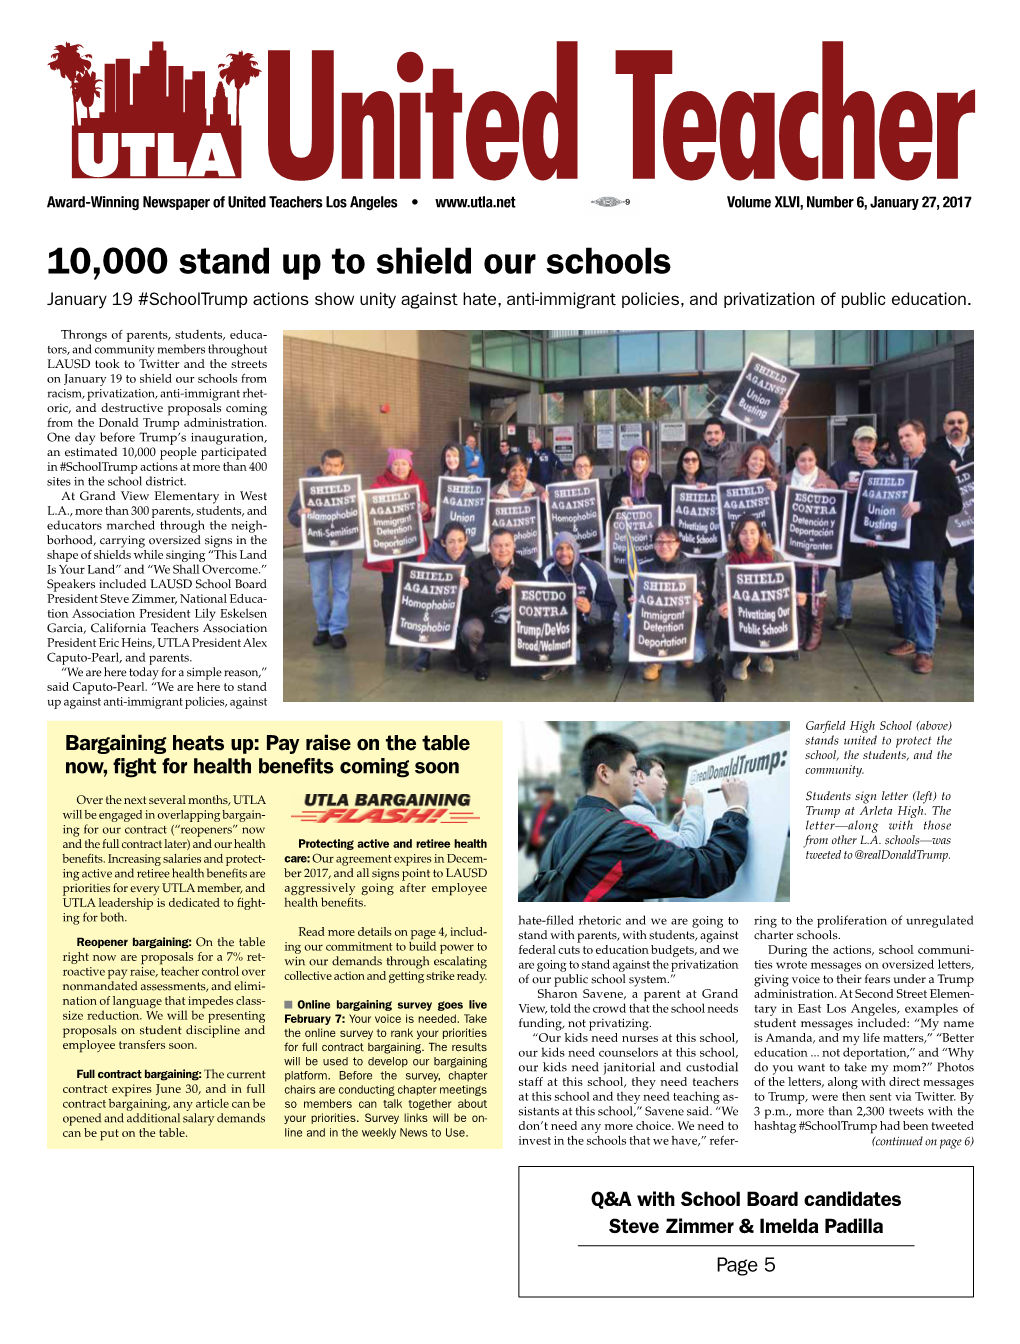 10,000 Stand up to Shield Our Schools January 19 #Schooltrump Actions Show Unity Against Hate, Anti-Immigrant Policies, and Privatization of Public Education